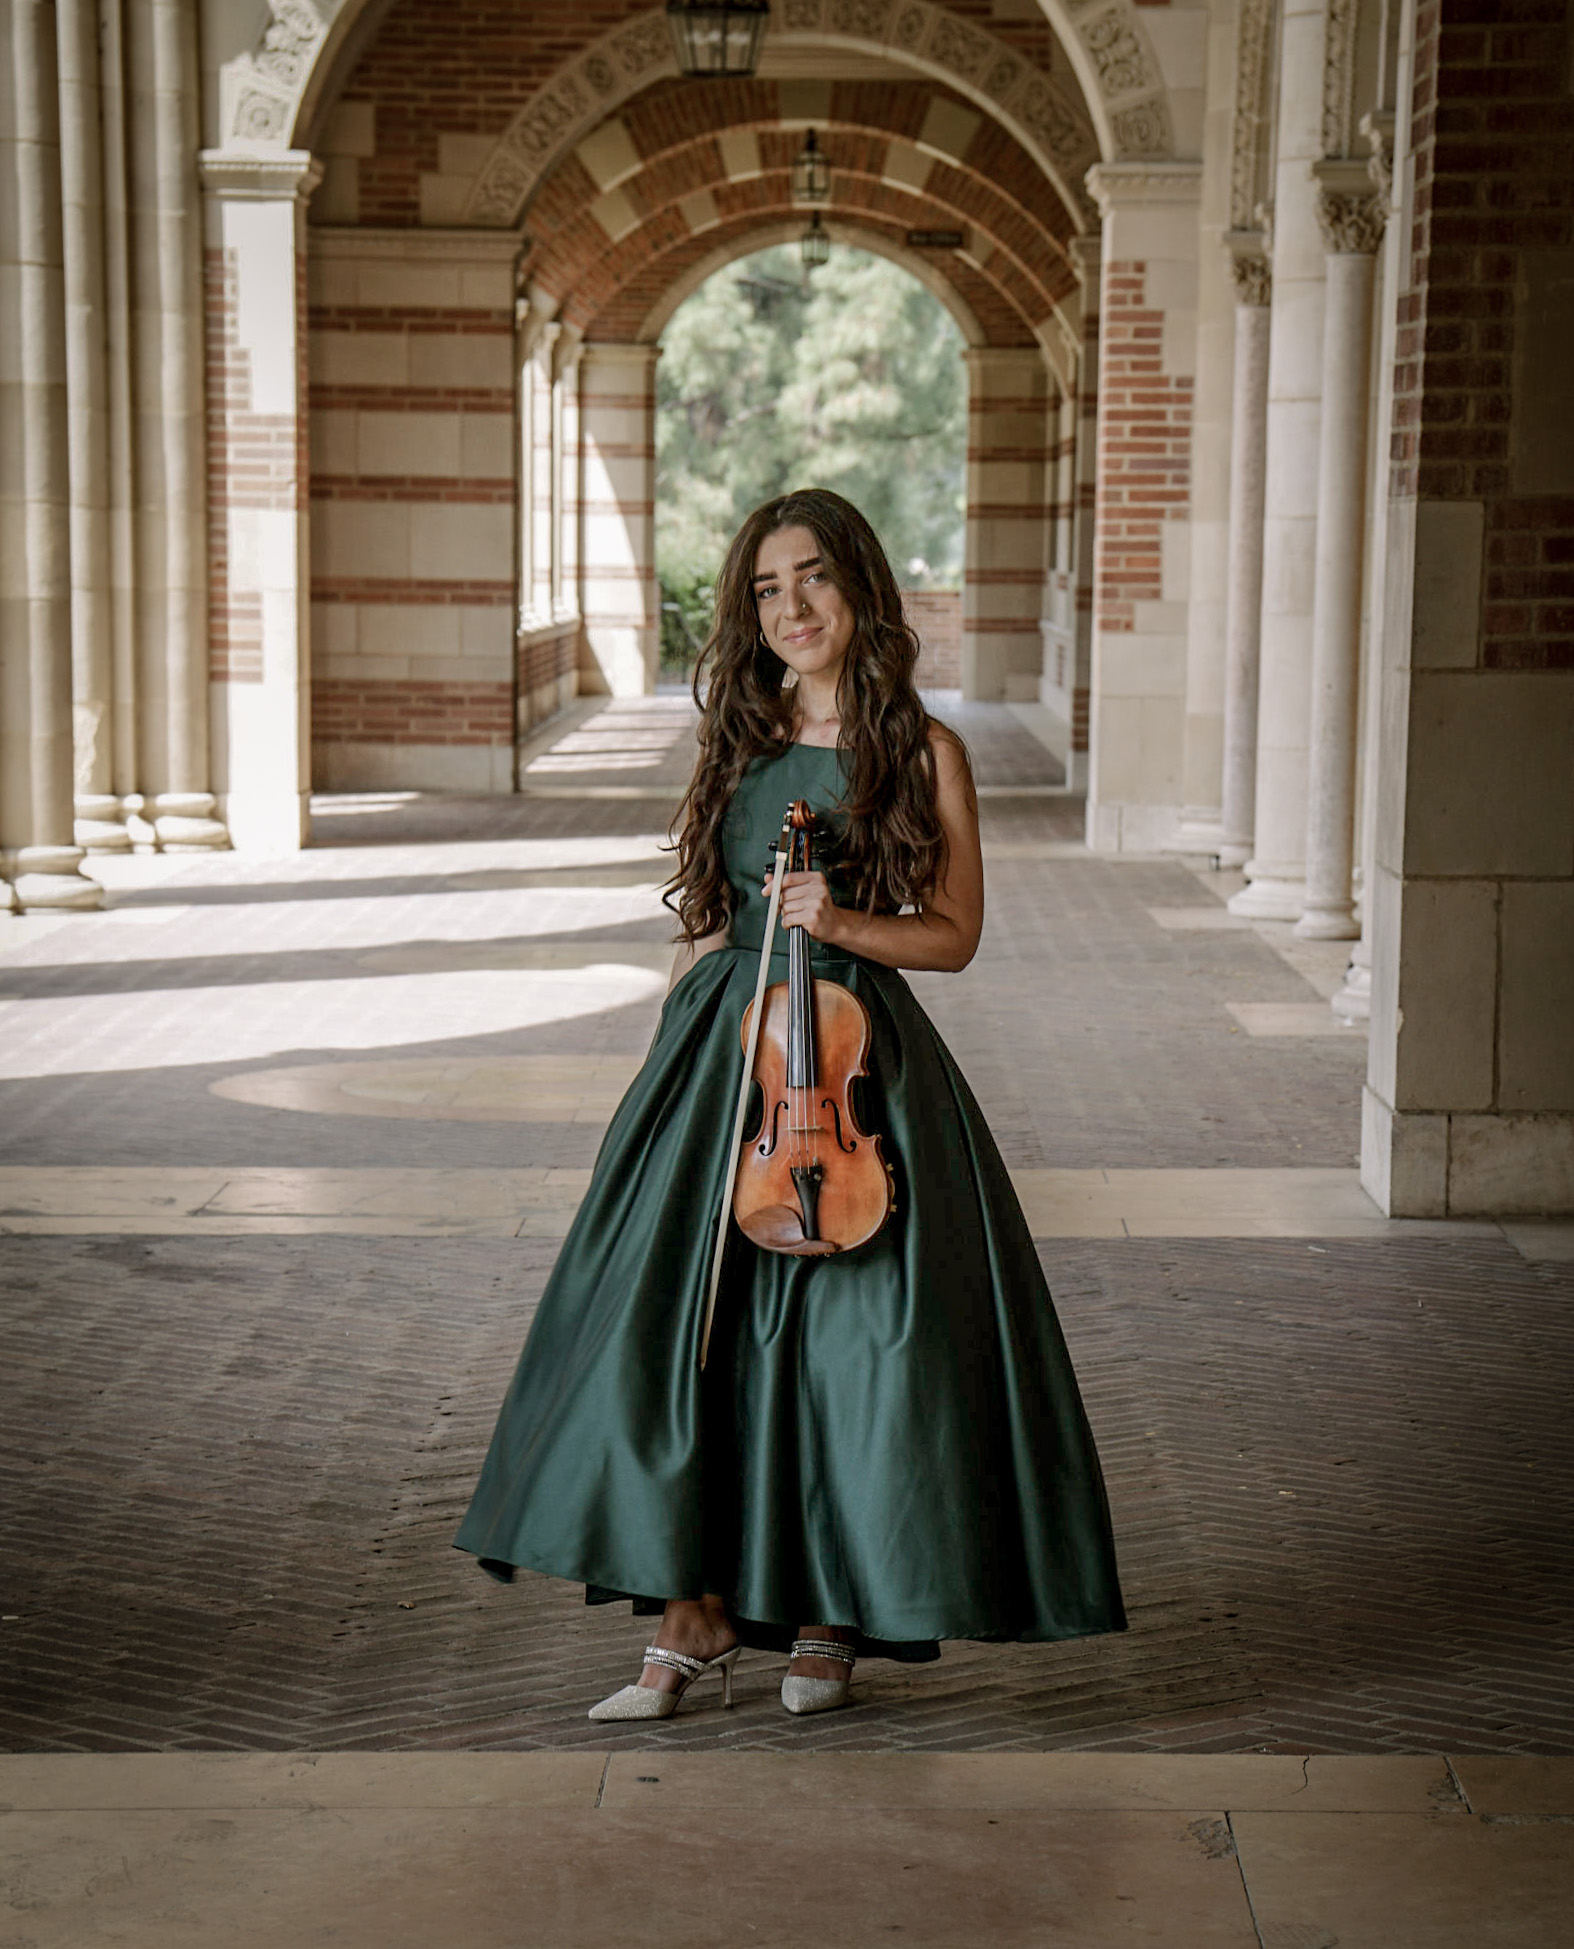 A picture of new LAJS intern Sarah Seltzer, standing in an archway in a green dress while holding her violin.